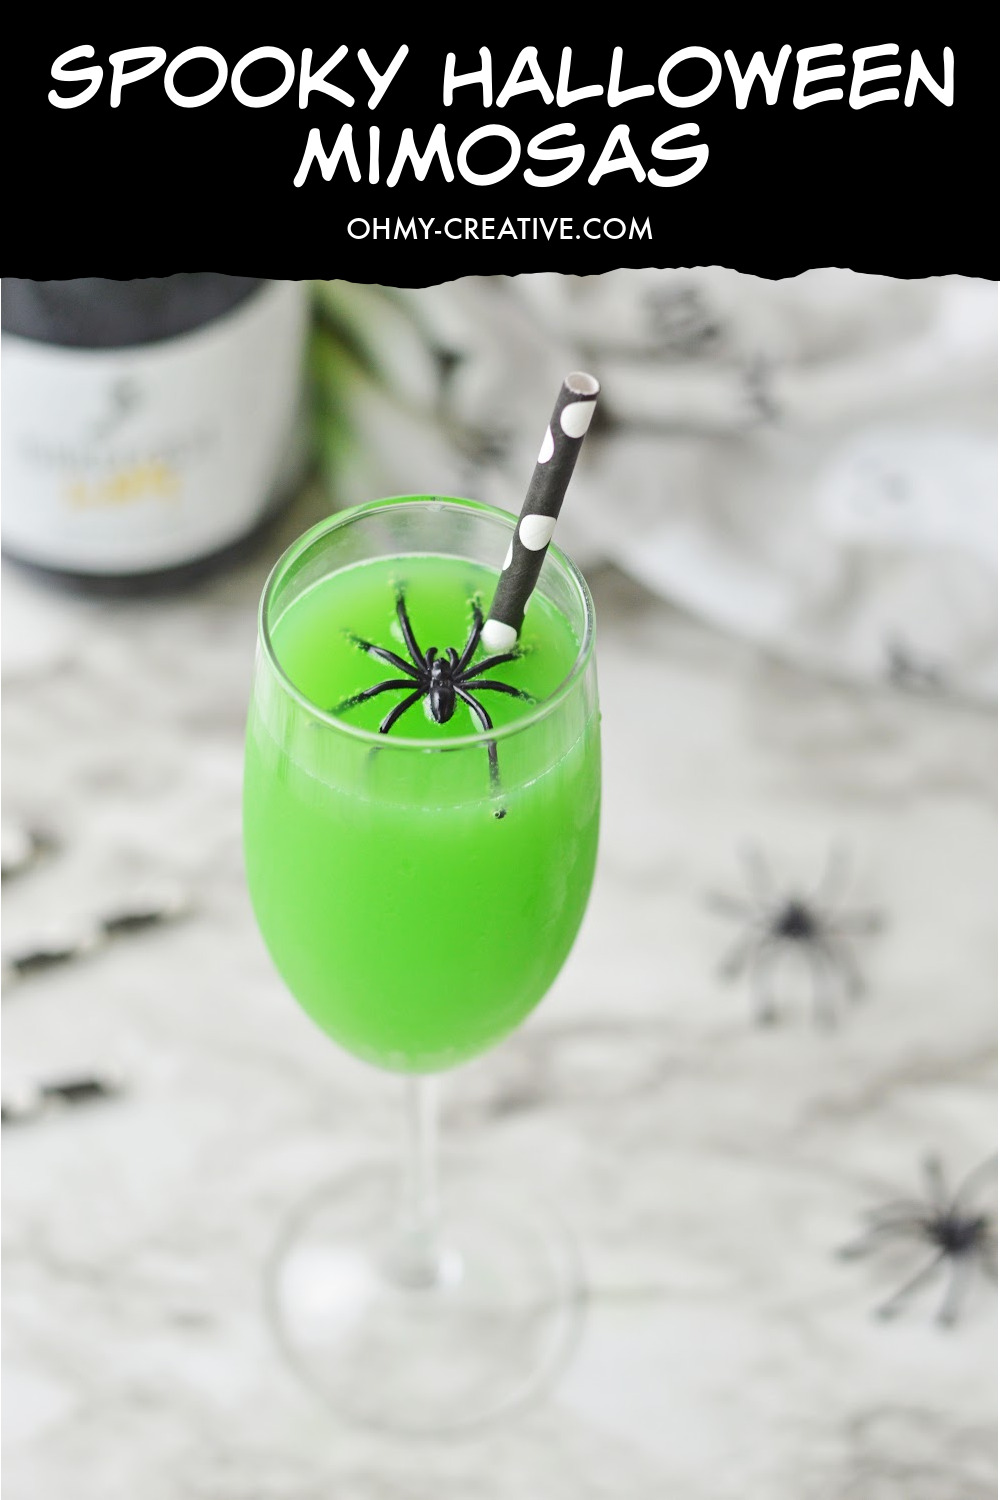 These spooky Halloween Mimosas are displayed on a black and gray marble background with creepy spiders and black and white straws in the background.